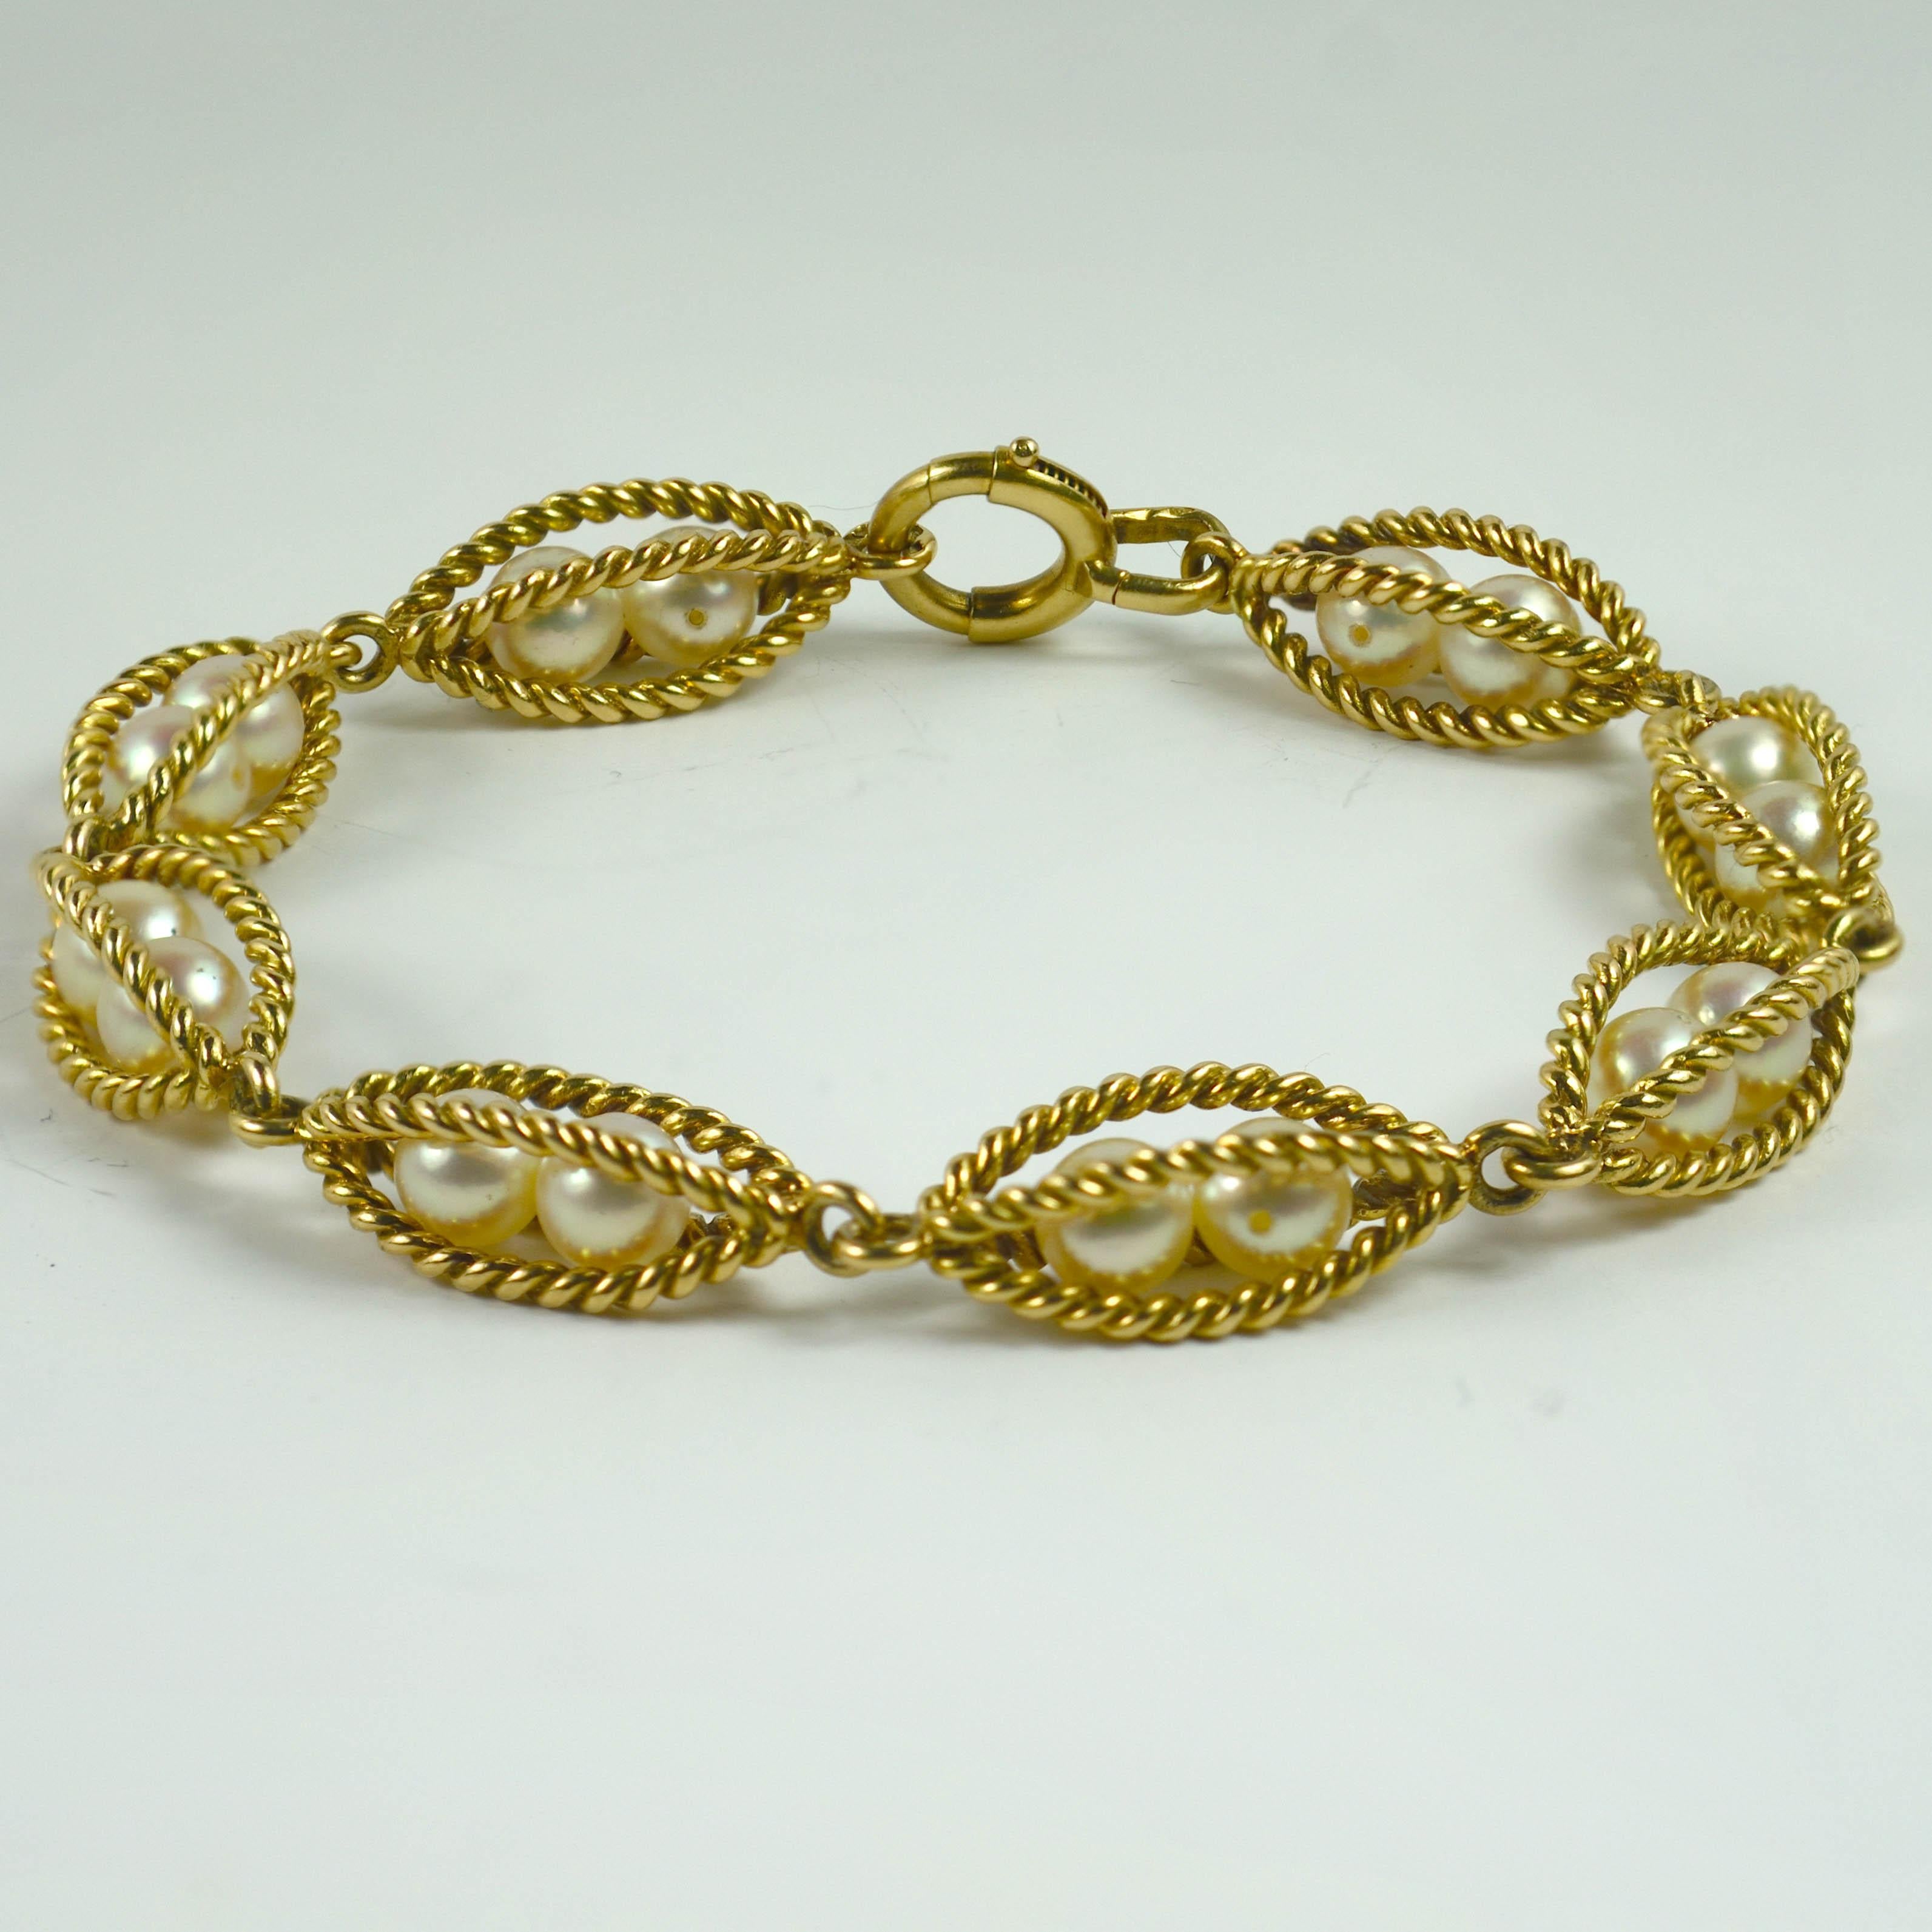 An 18 karat yellow gold bracelet with cultured pearls caged by twisted gold wires. 
French marks for 18k gold and makers mark for Edouard Thuillier.

Weight: 22.10 grams
Dimensions: 8